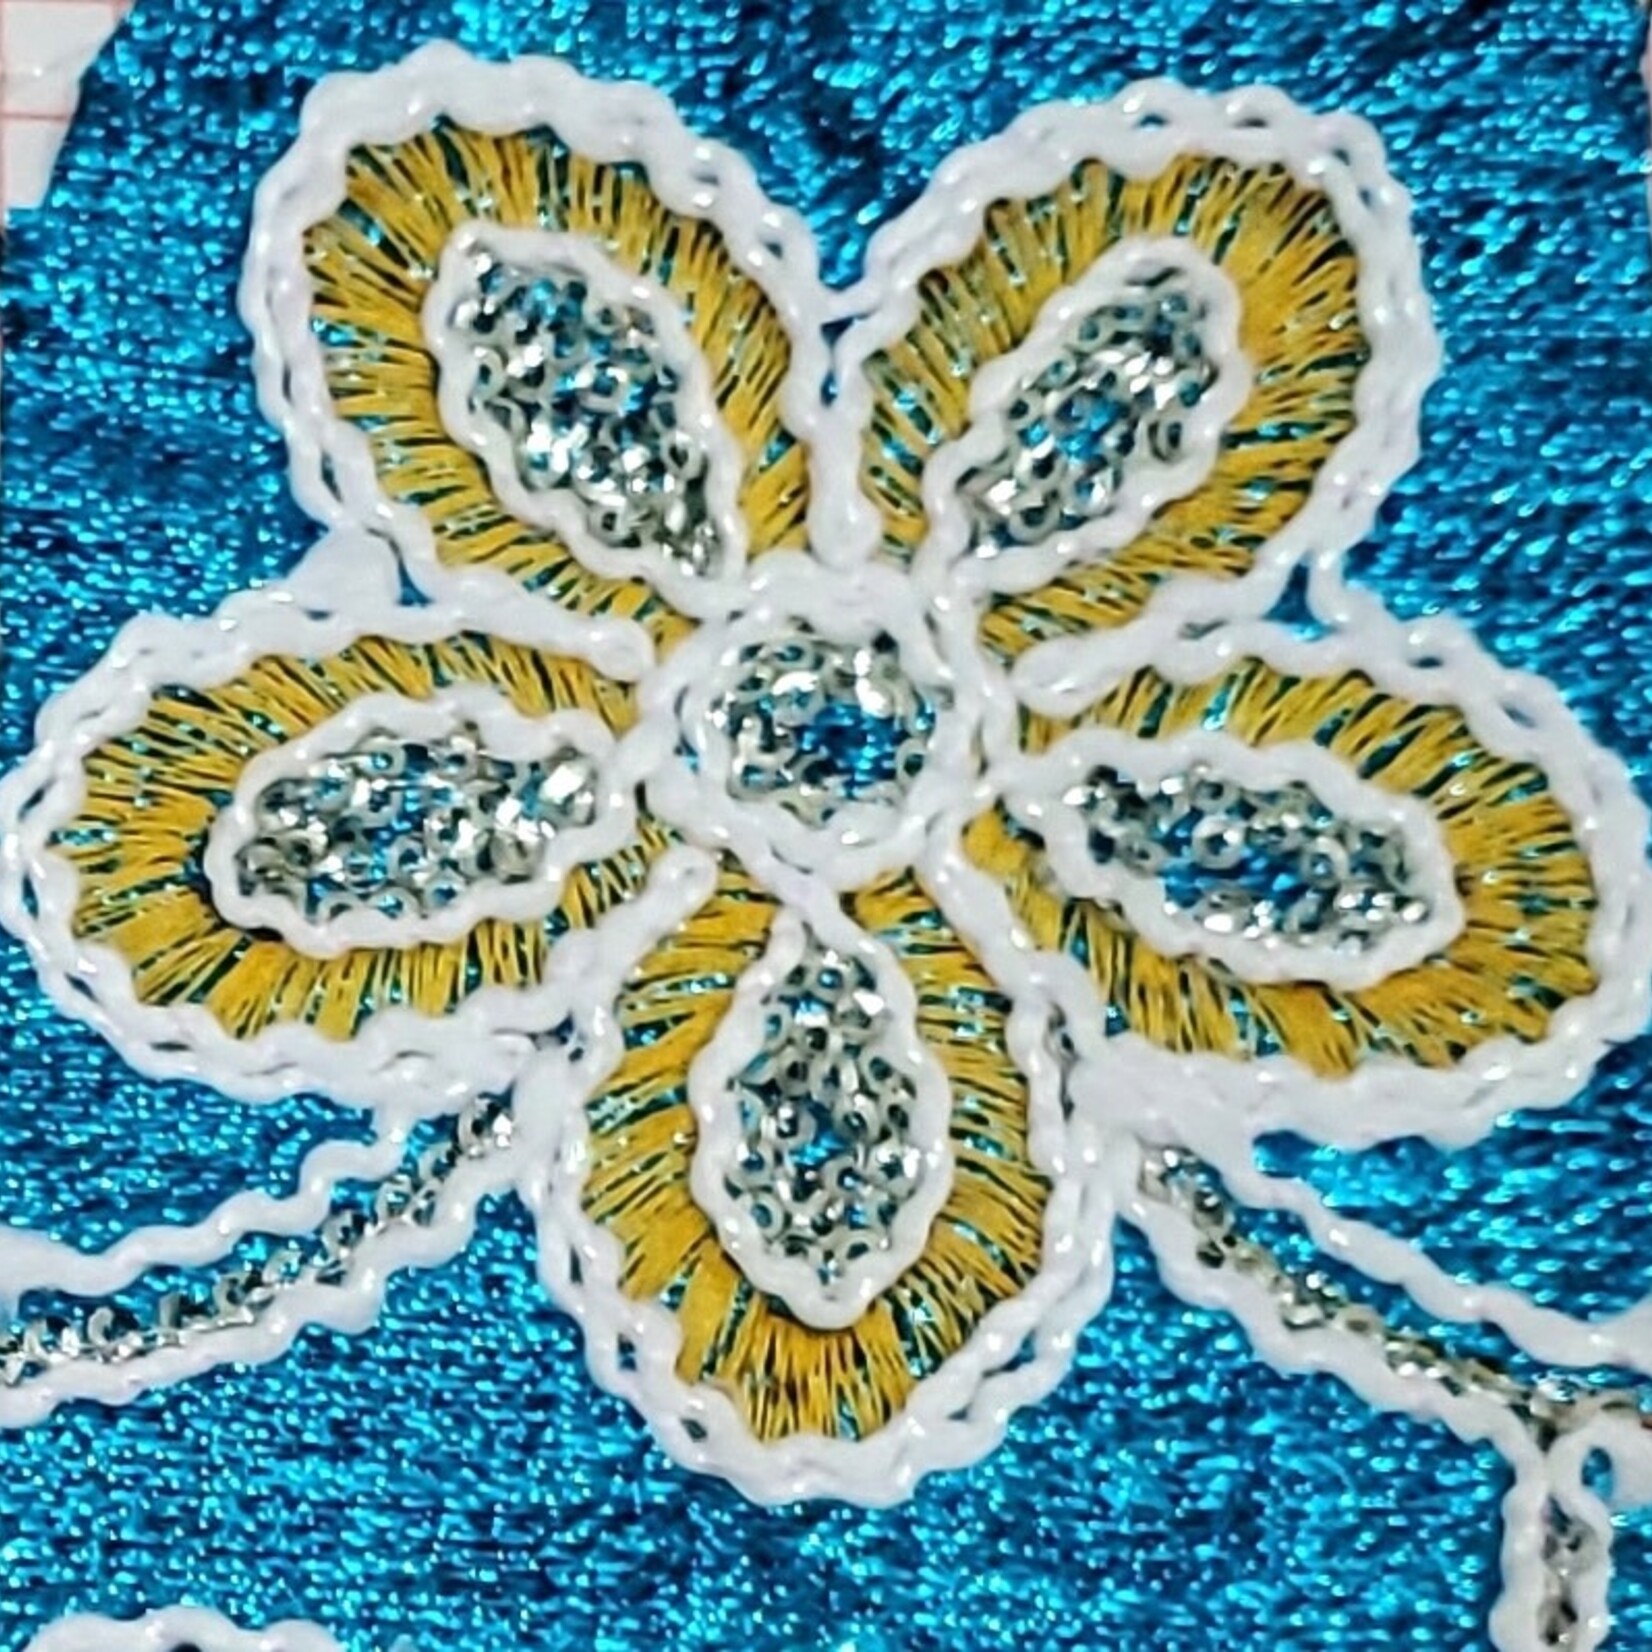 Embroided Flower Lame 44-45 Inches Turquoise